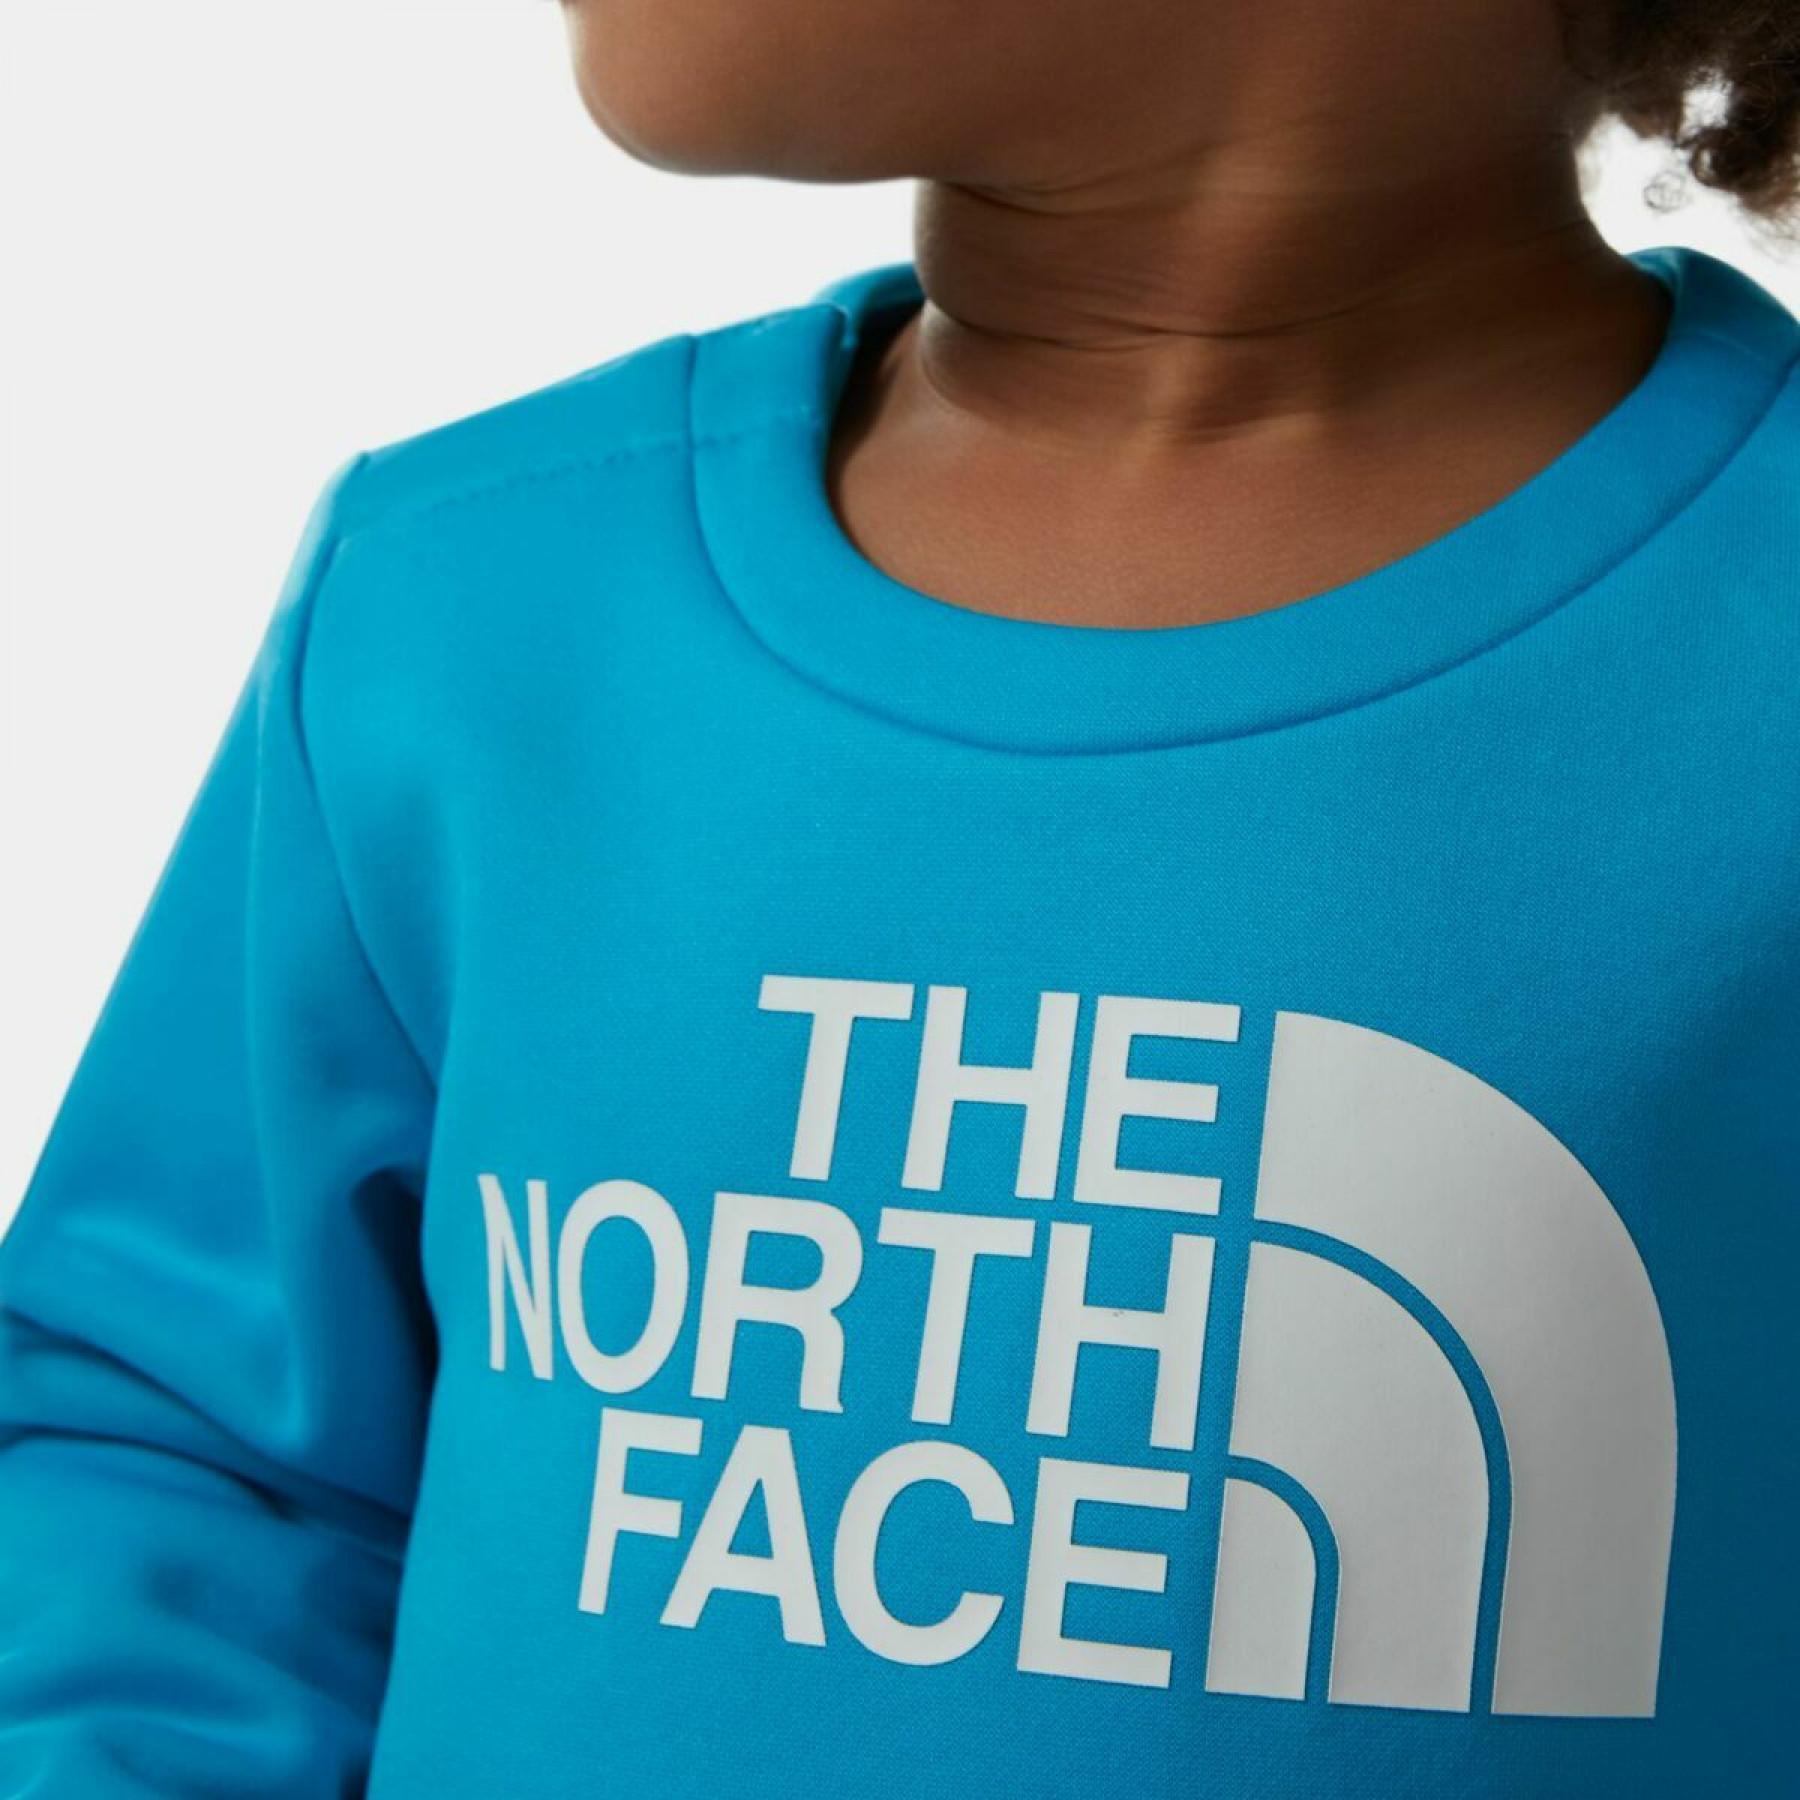 Babyset The North Face Surgent Col rond